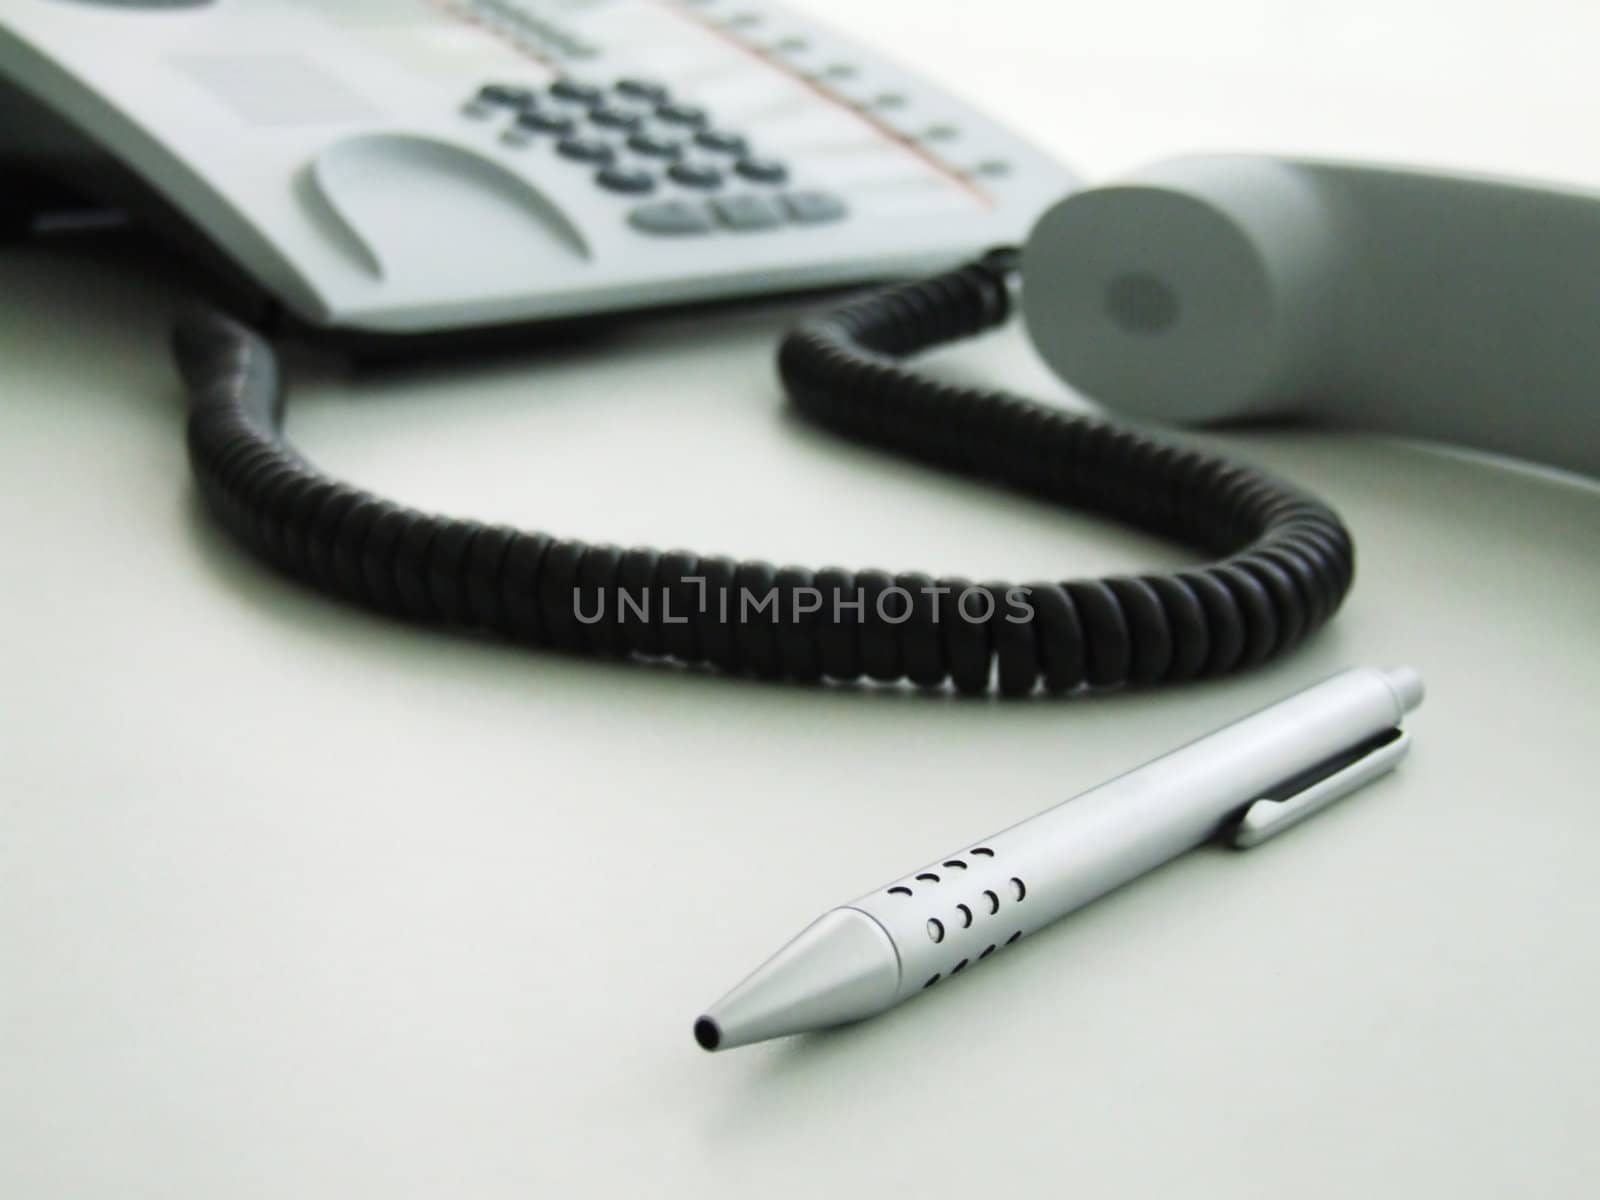 A phone and a pen on a table